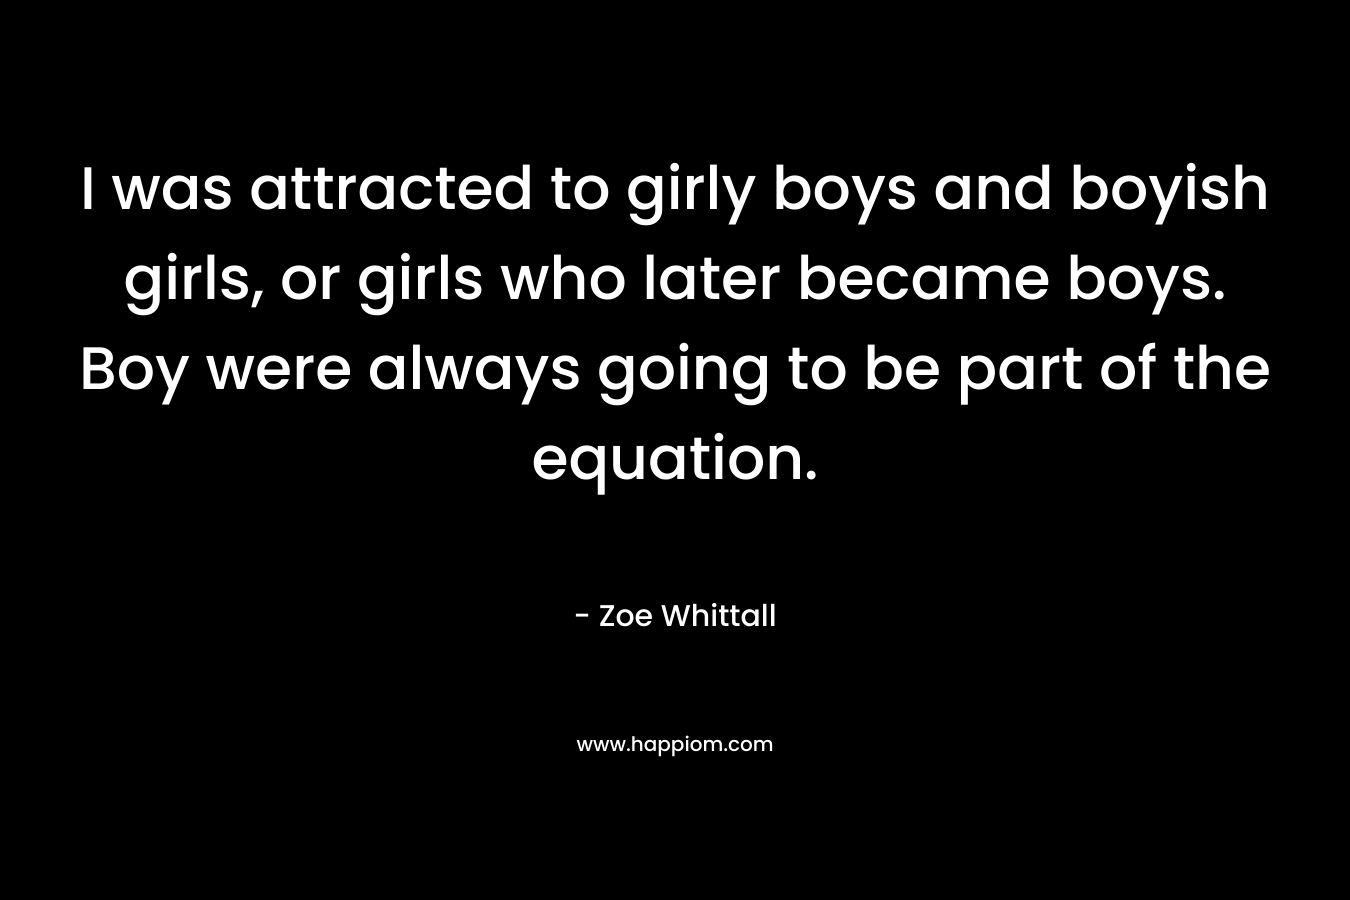 I was attracted to girly boys and boyish girls, or girls who later became boys. Boy were always going to be part of the equation. – Zoe Whittall